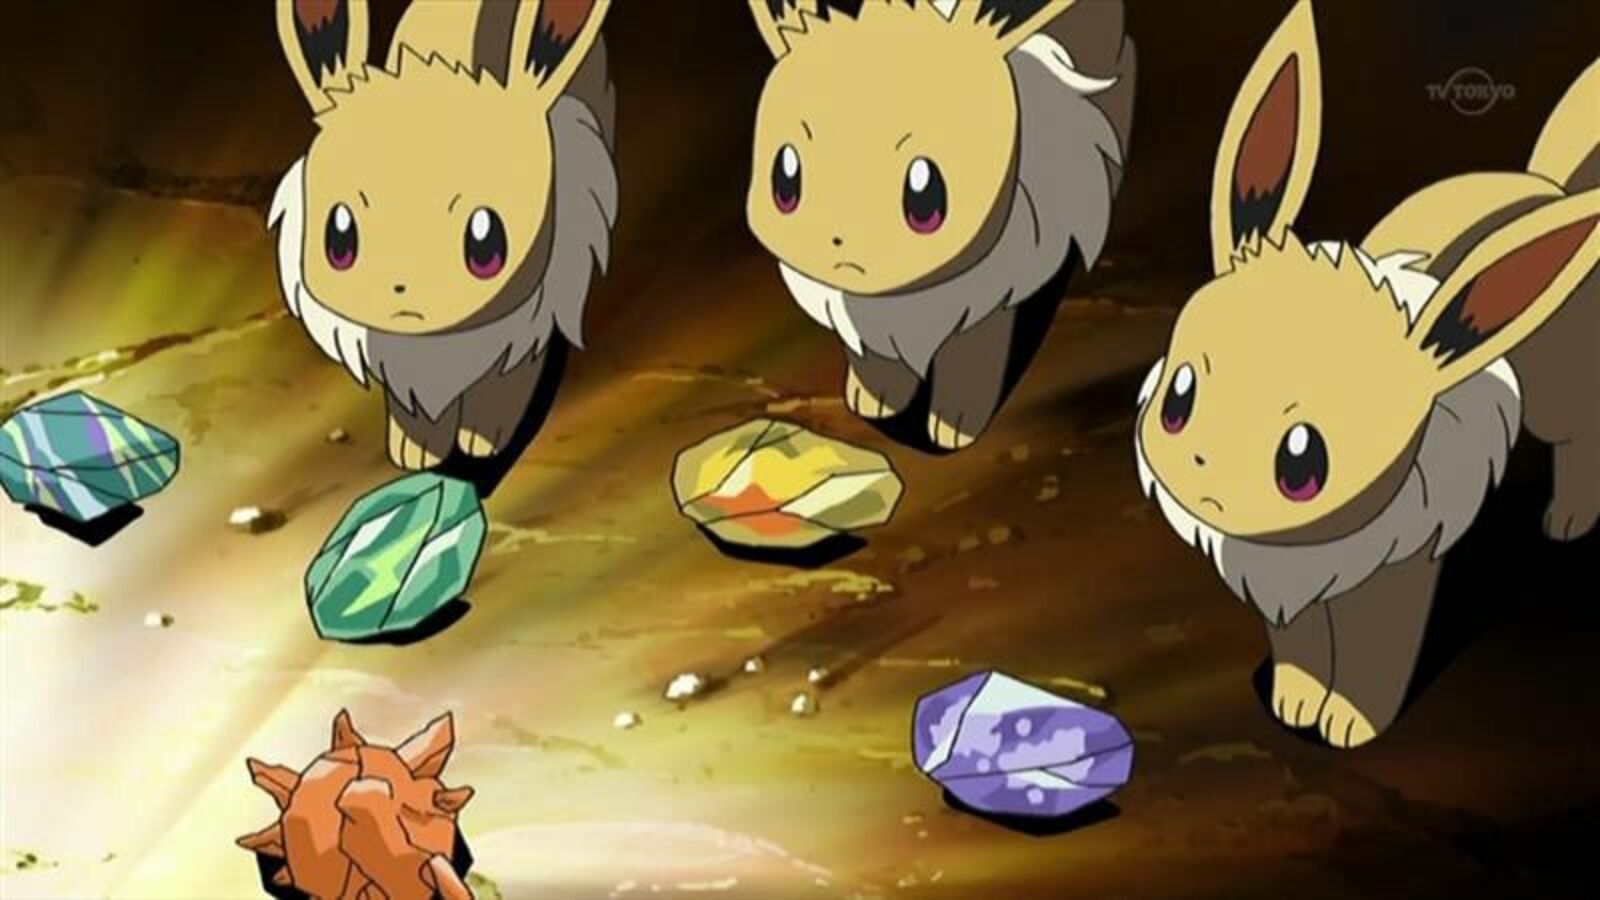 Eevee evolutions in Pokémon go Explained: Know How to